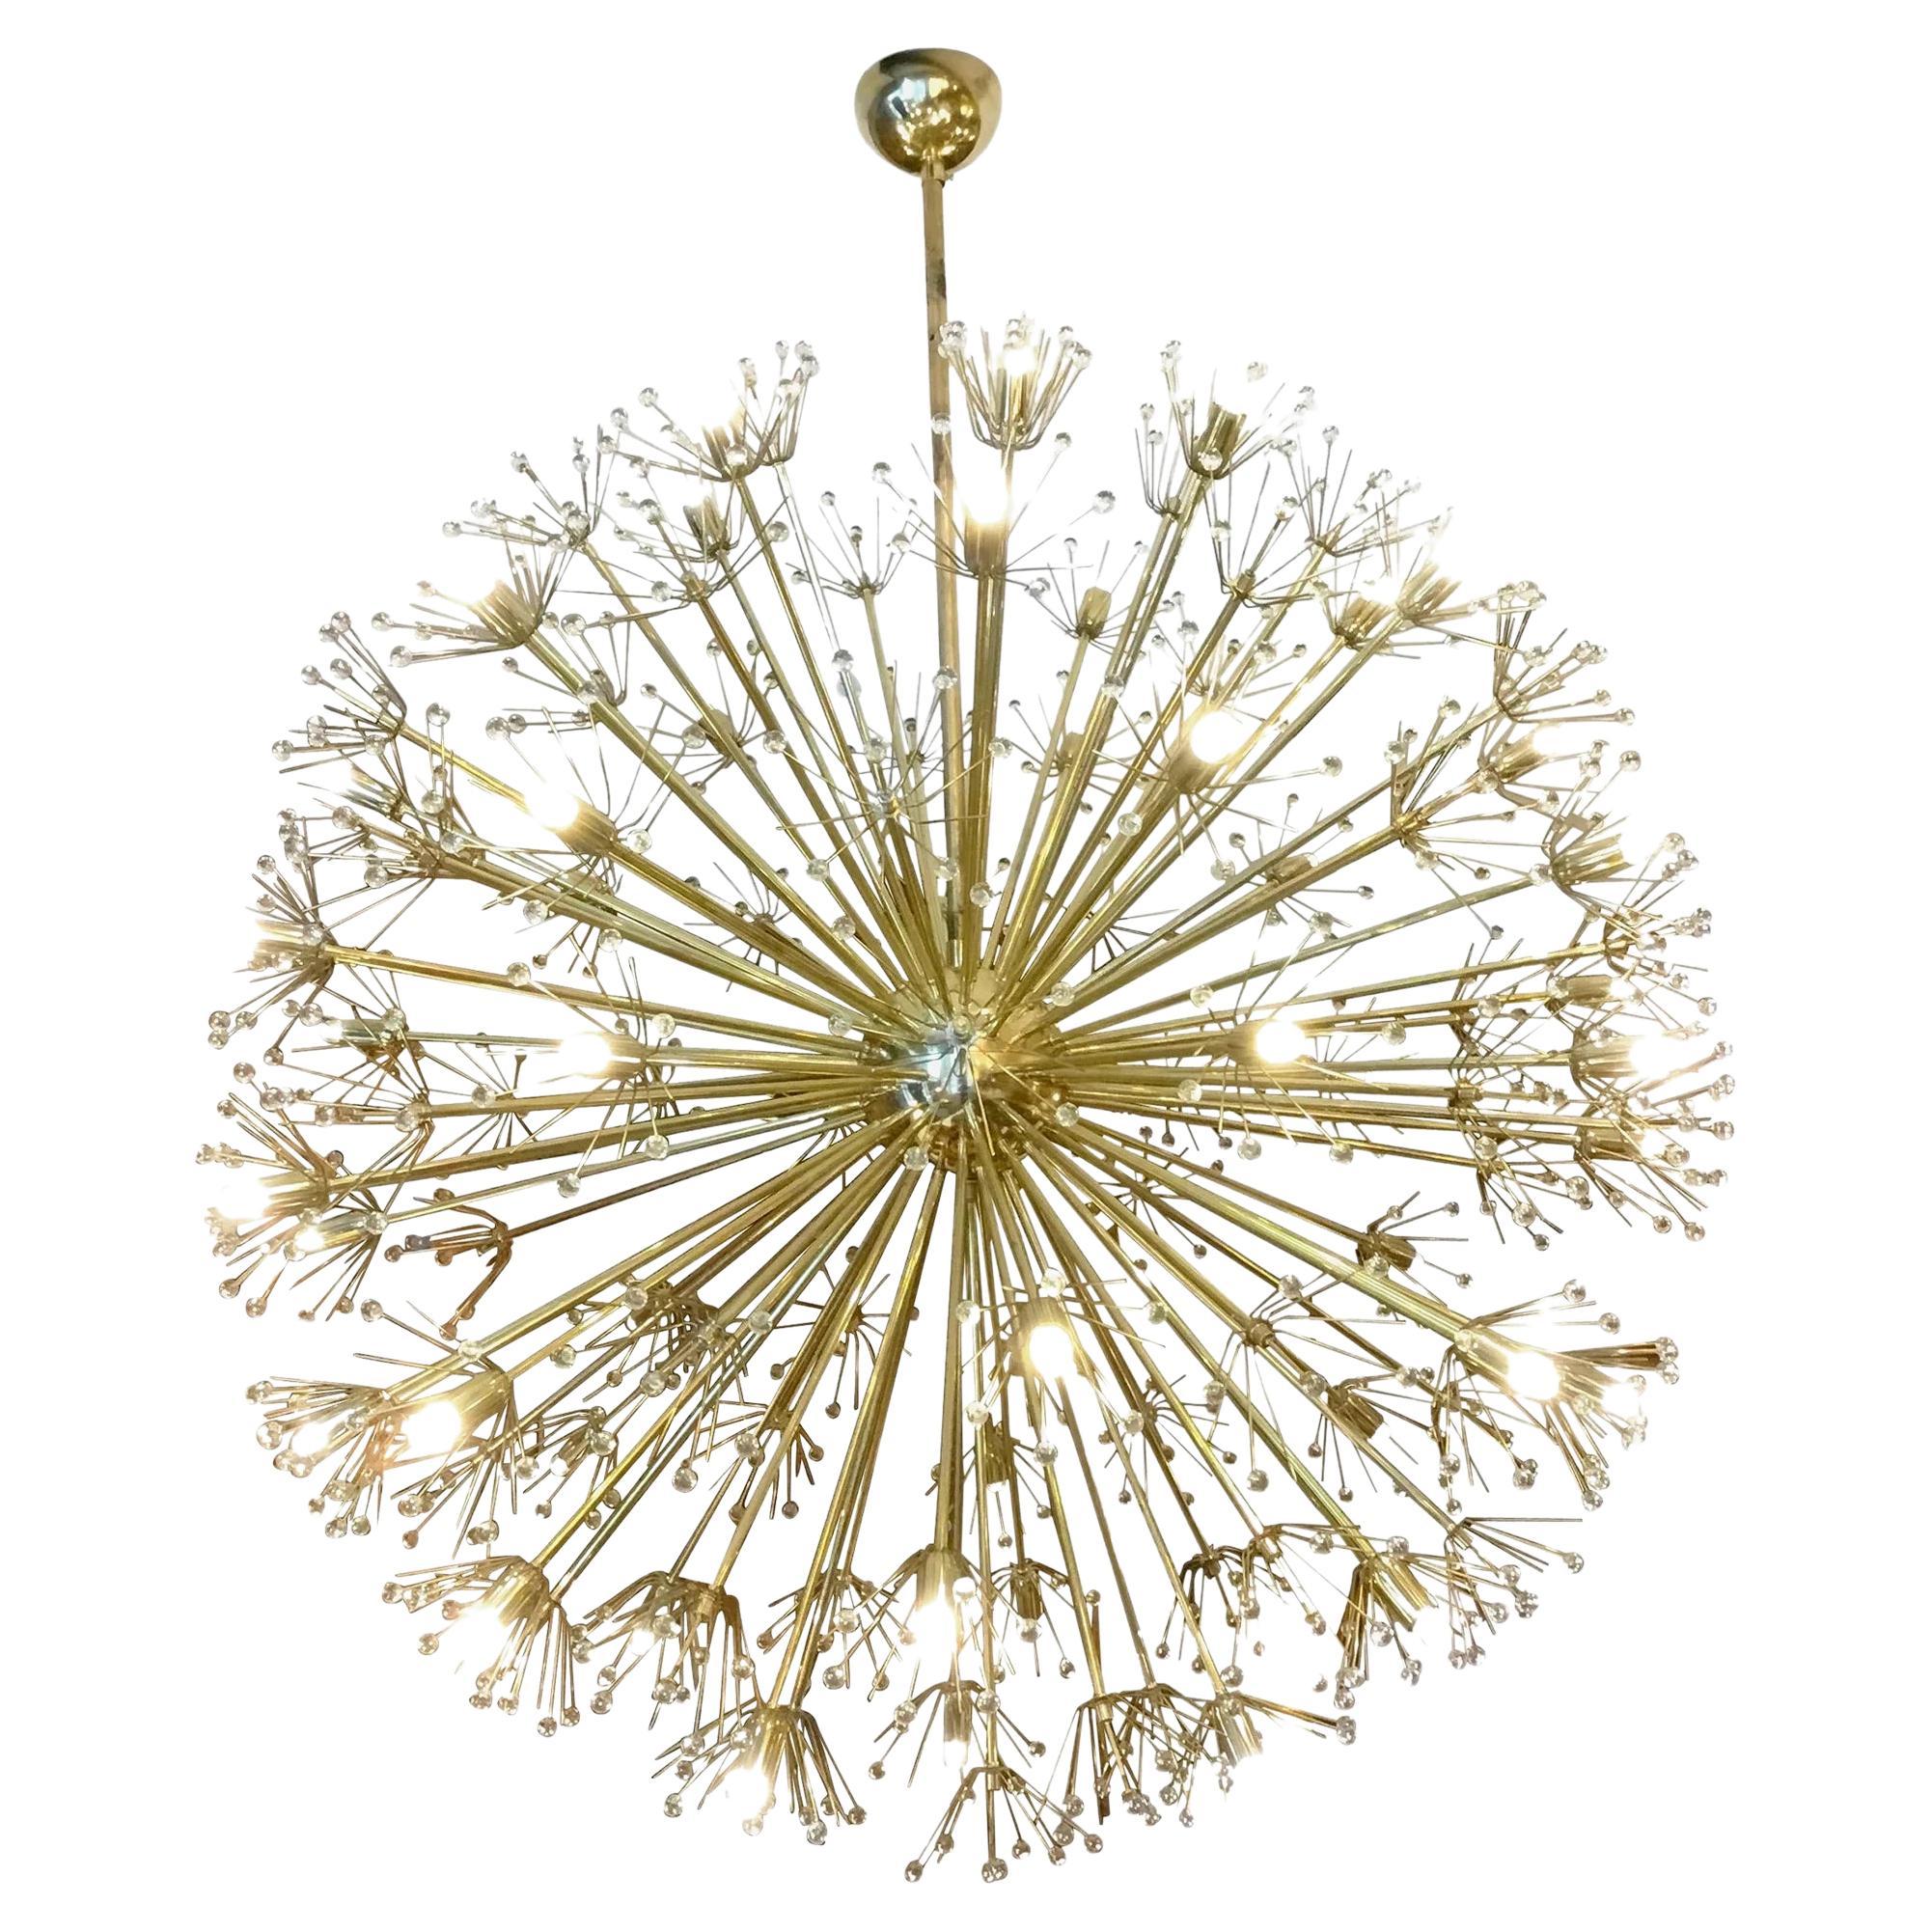 Large “Sputnik” chandelier in brass and glass Murano, Italy, circa 1980